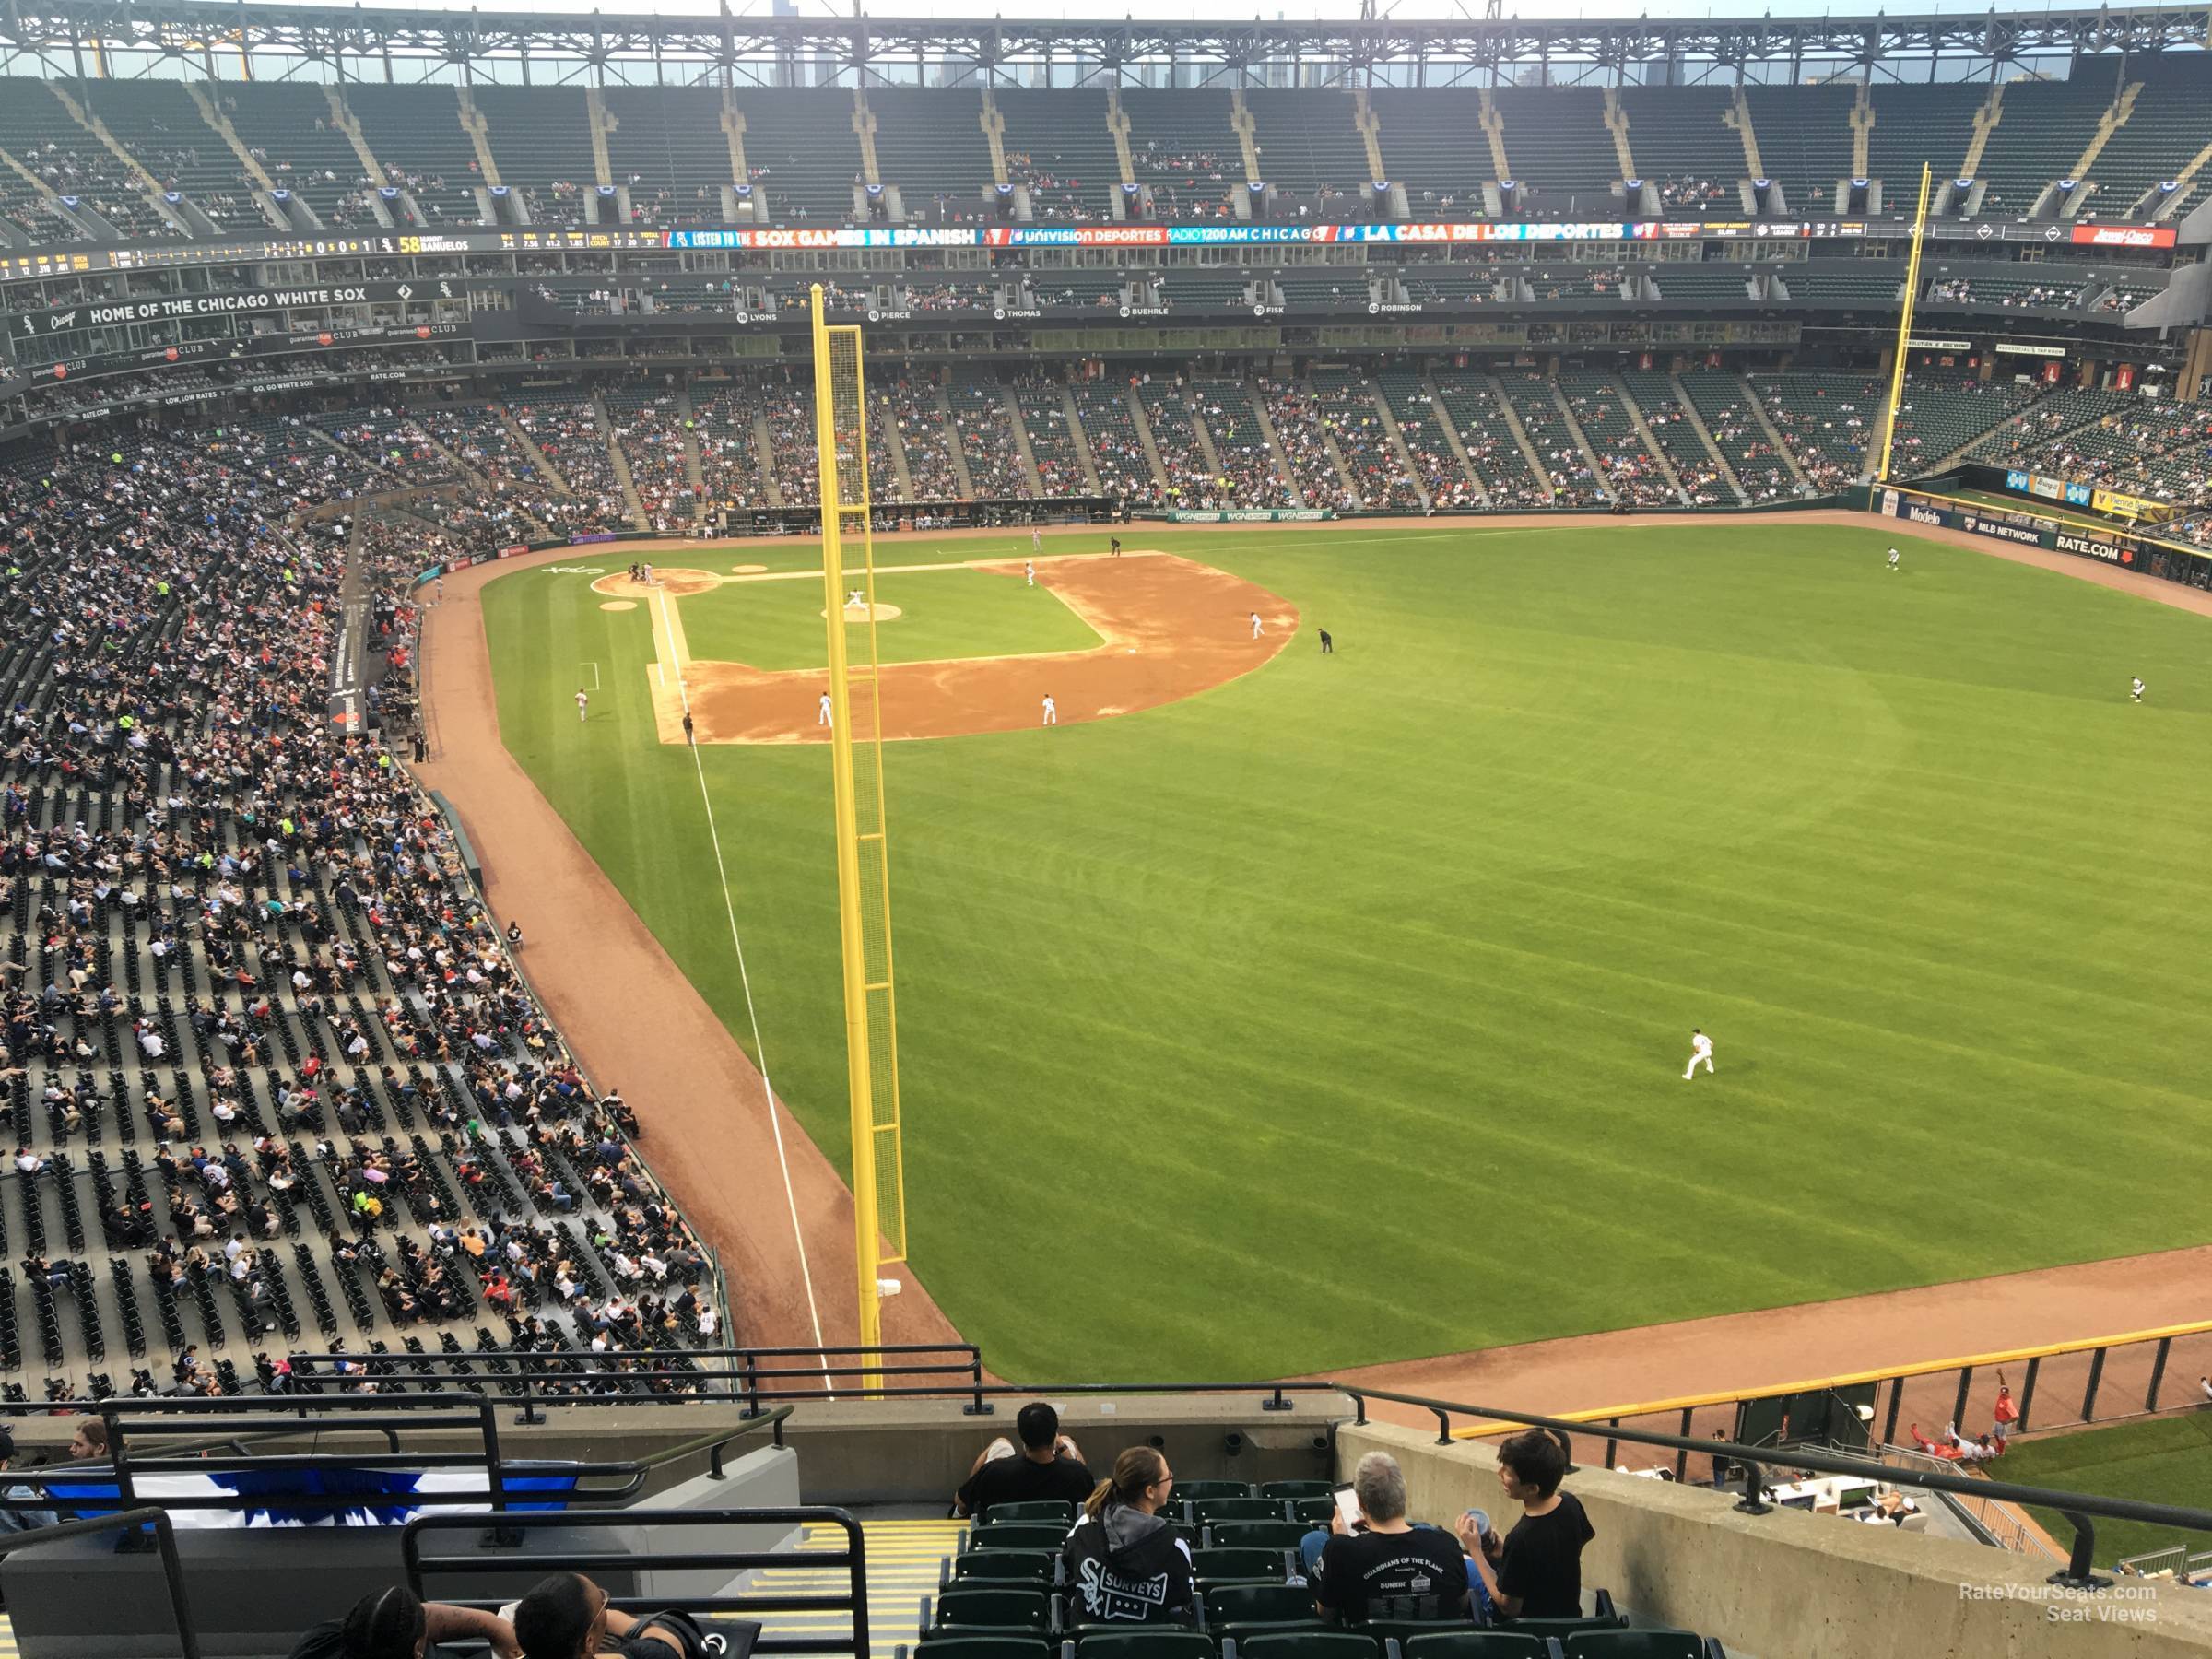 section 506, row 12 seat view  - guaranteed rate field